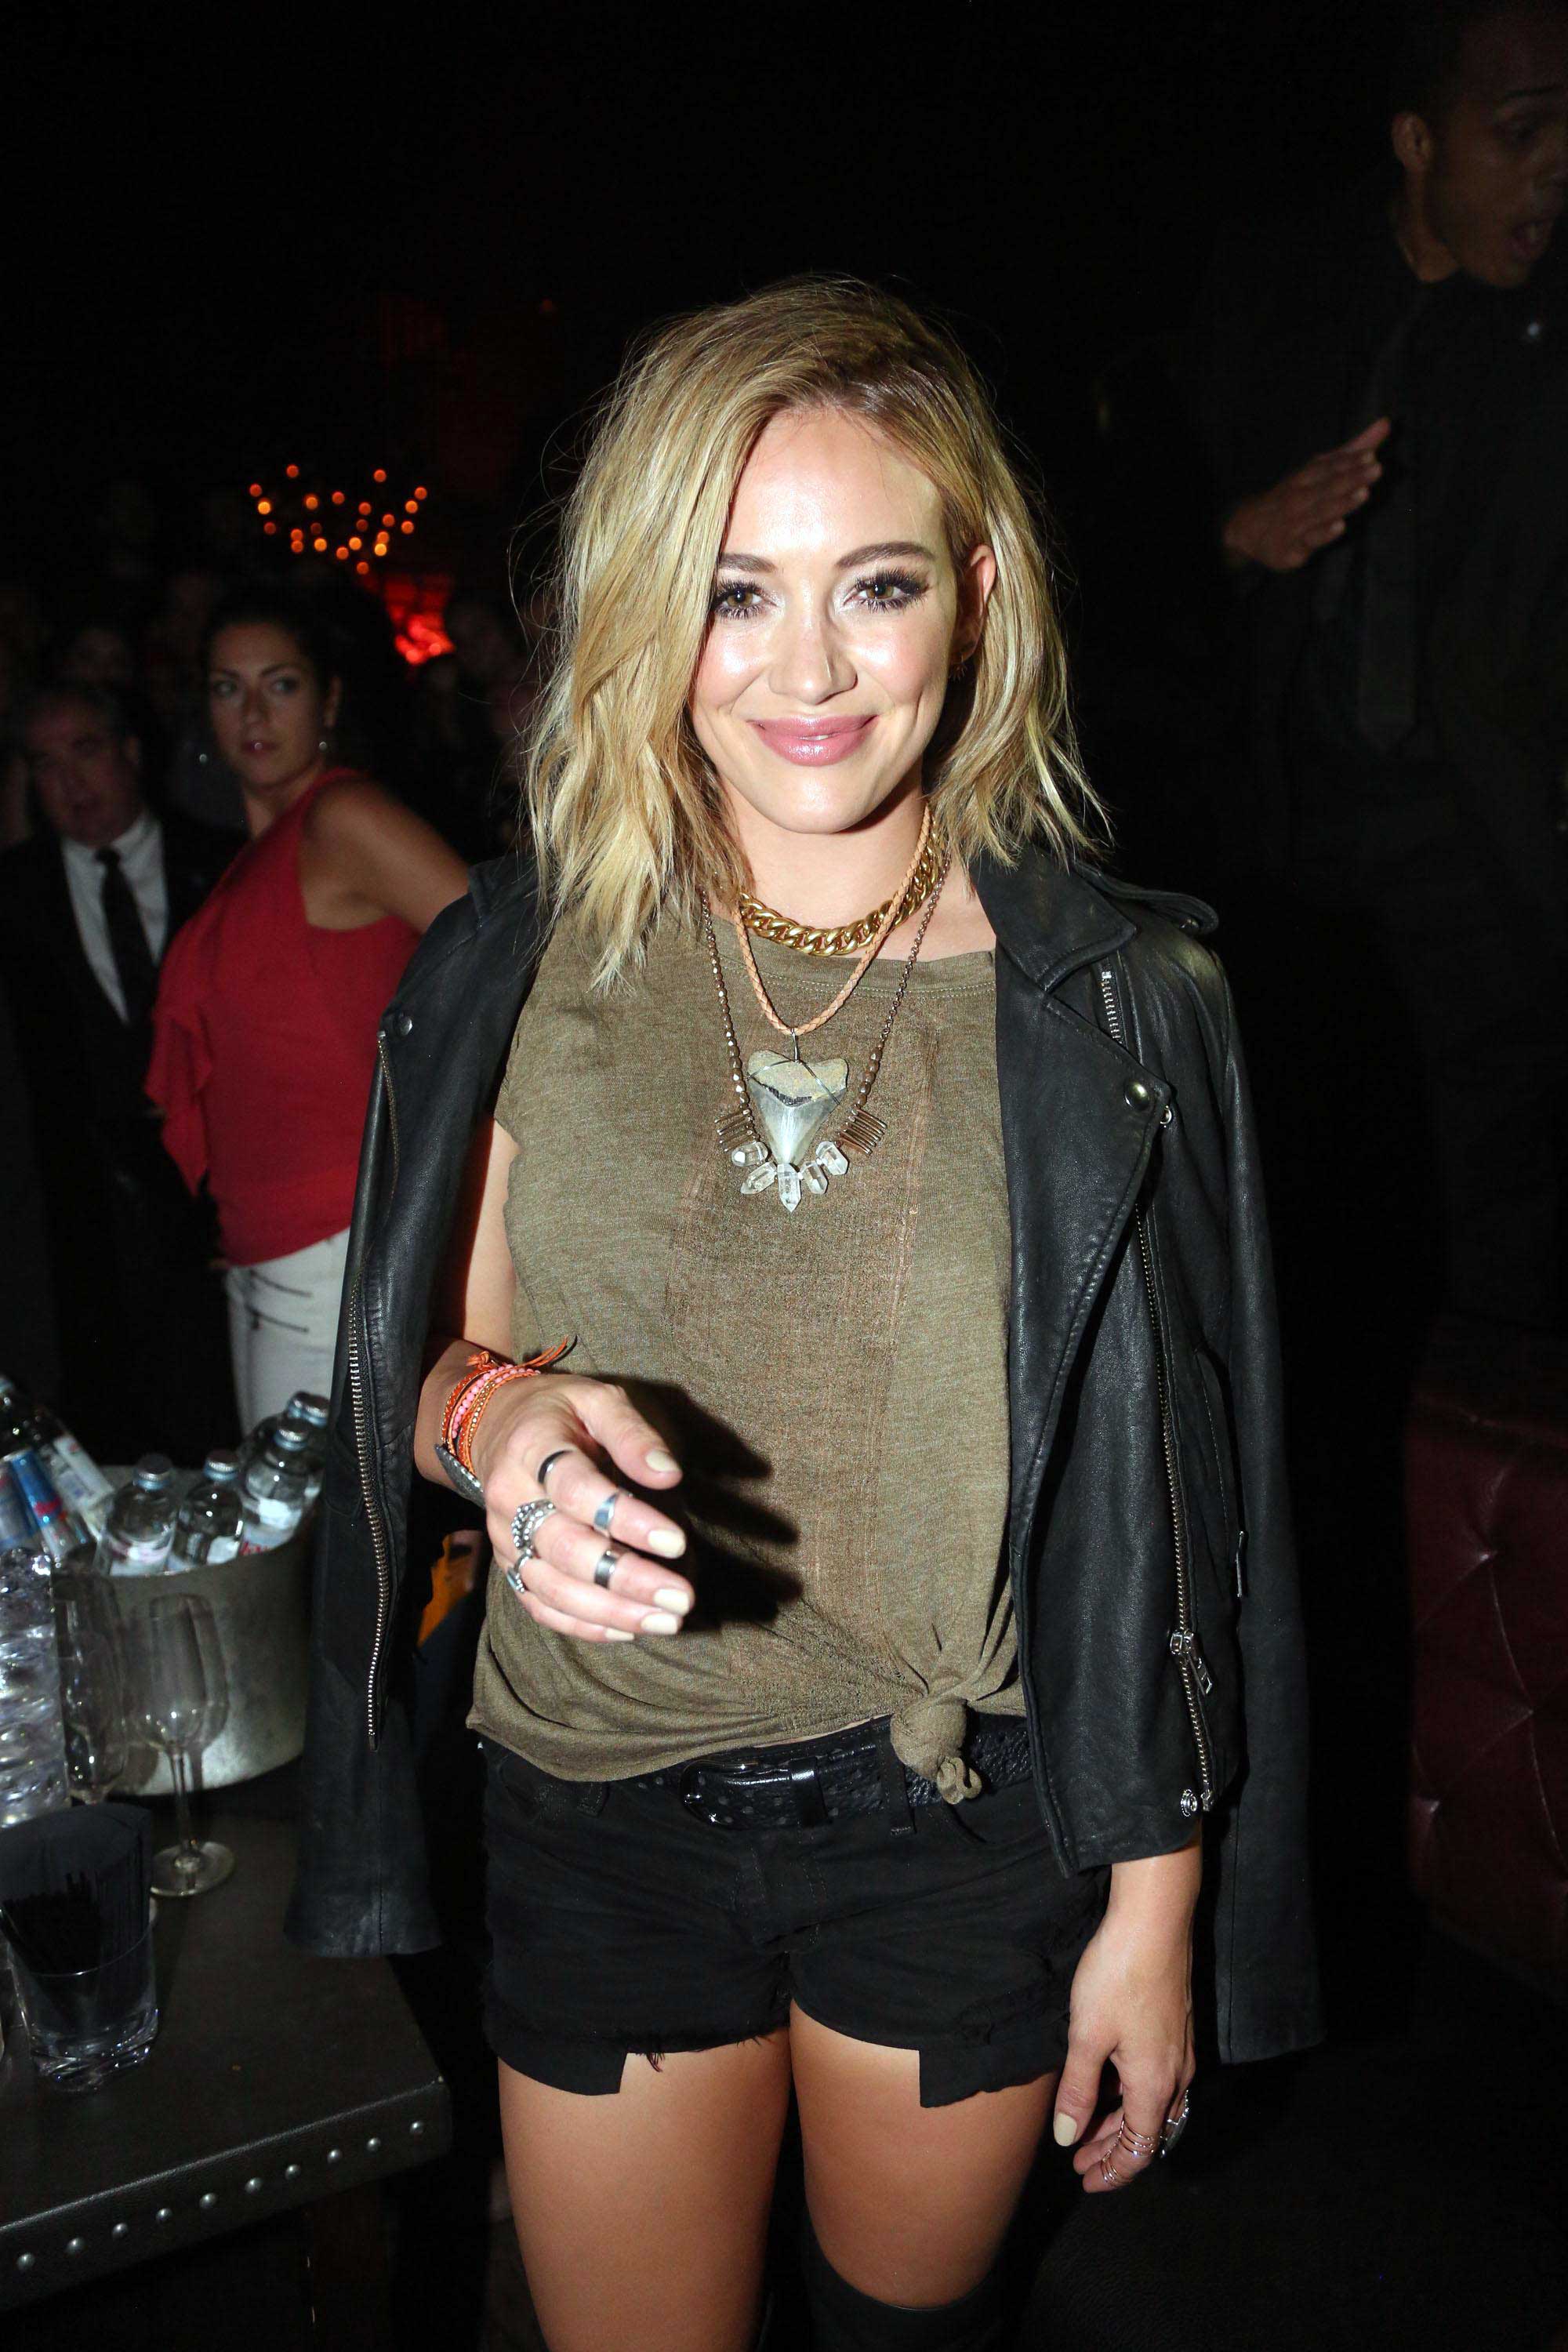 Hilary Duff attends Chasing The Sun single release celebration